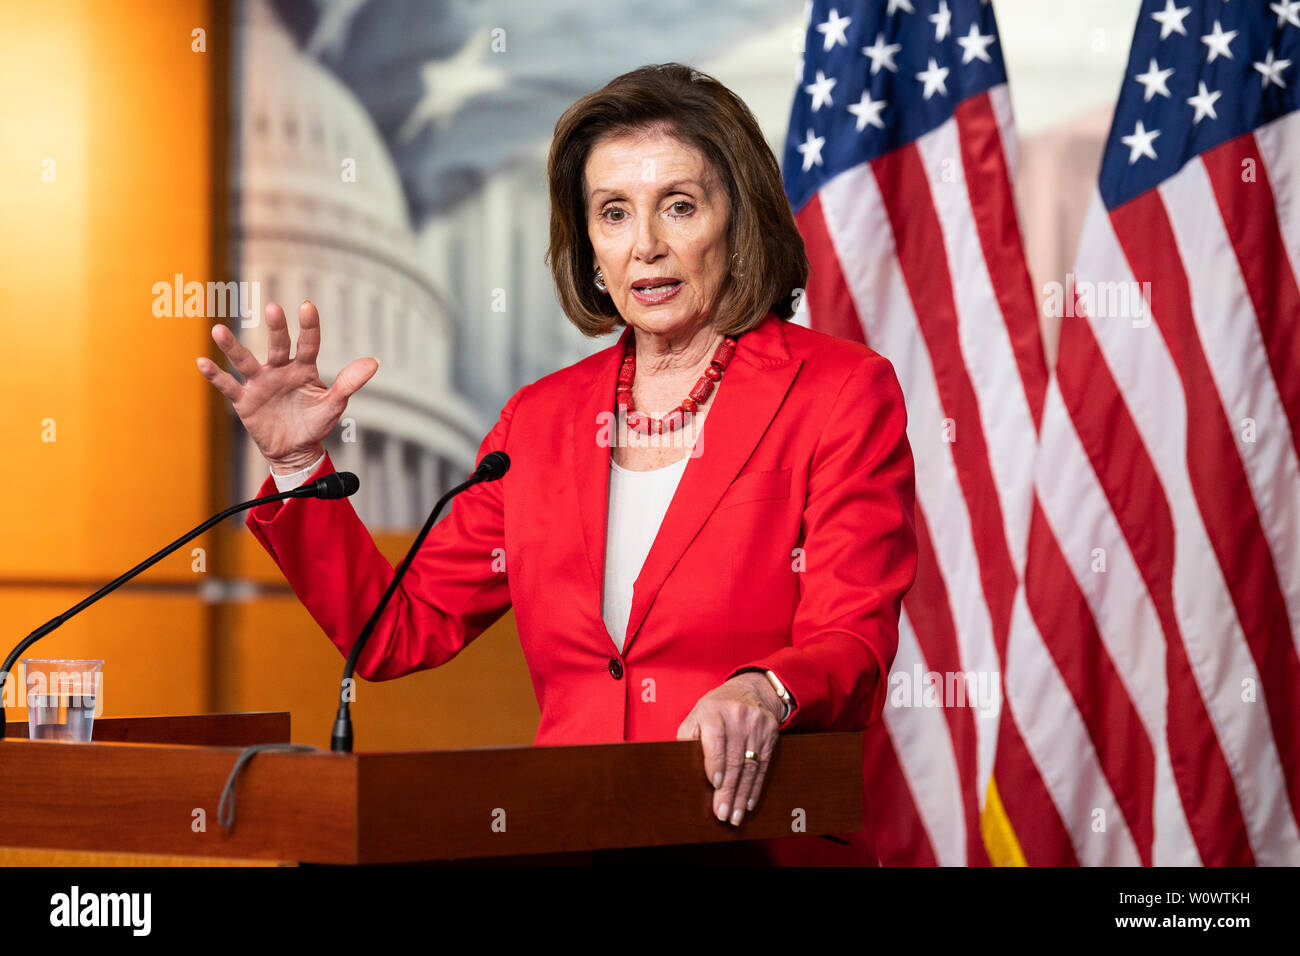 Washington, United States. 27th June, 2019. House Speaker Nancy Pelosi (D-CA) speaking at her weekly press conference at the US Capitol in Washington, DC. Credit: SOPA Images Limited/Alamy Live News Stock Photo